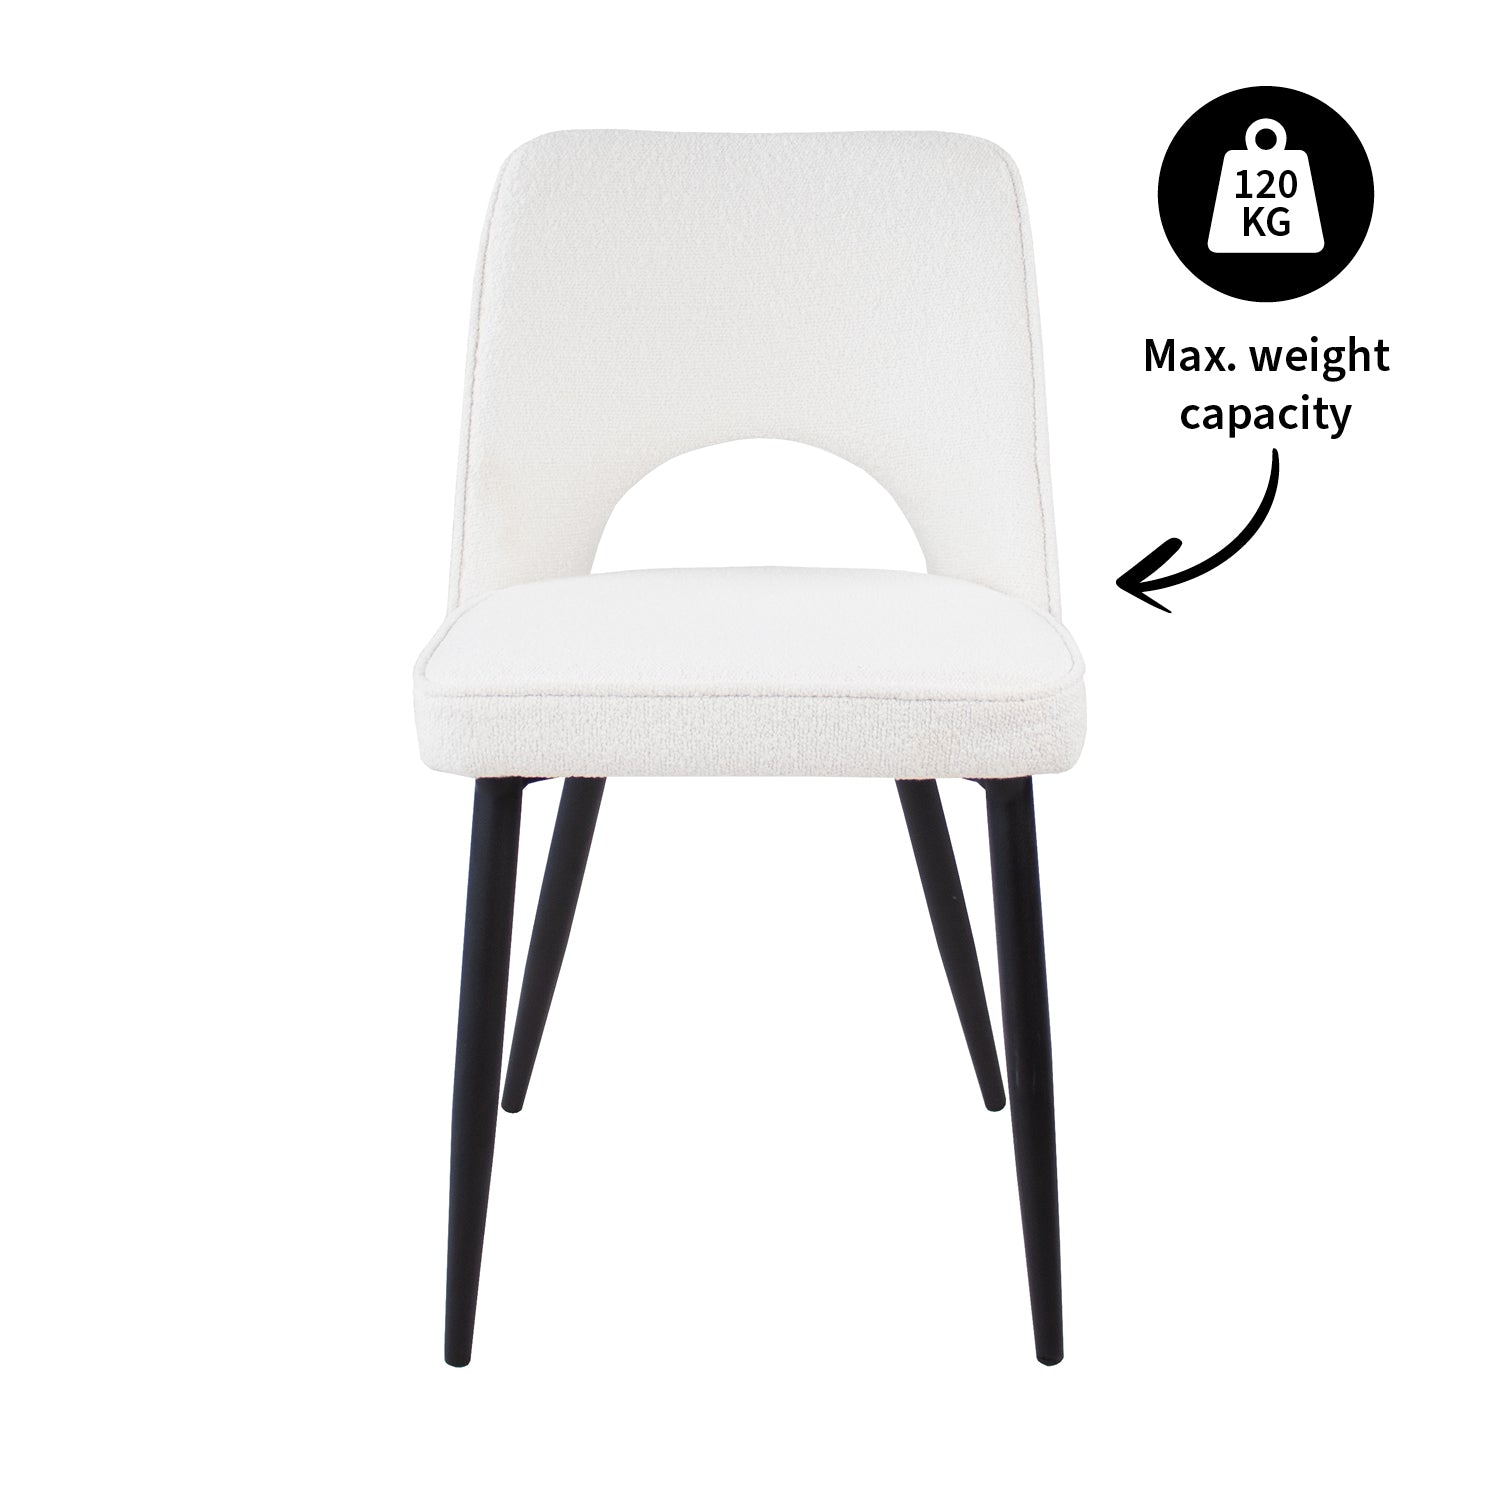 Kick dining room chair Mare